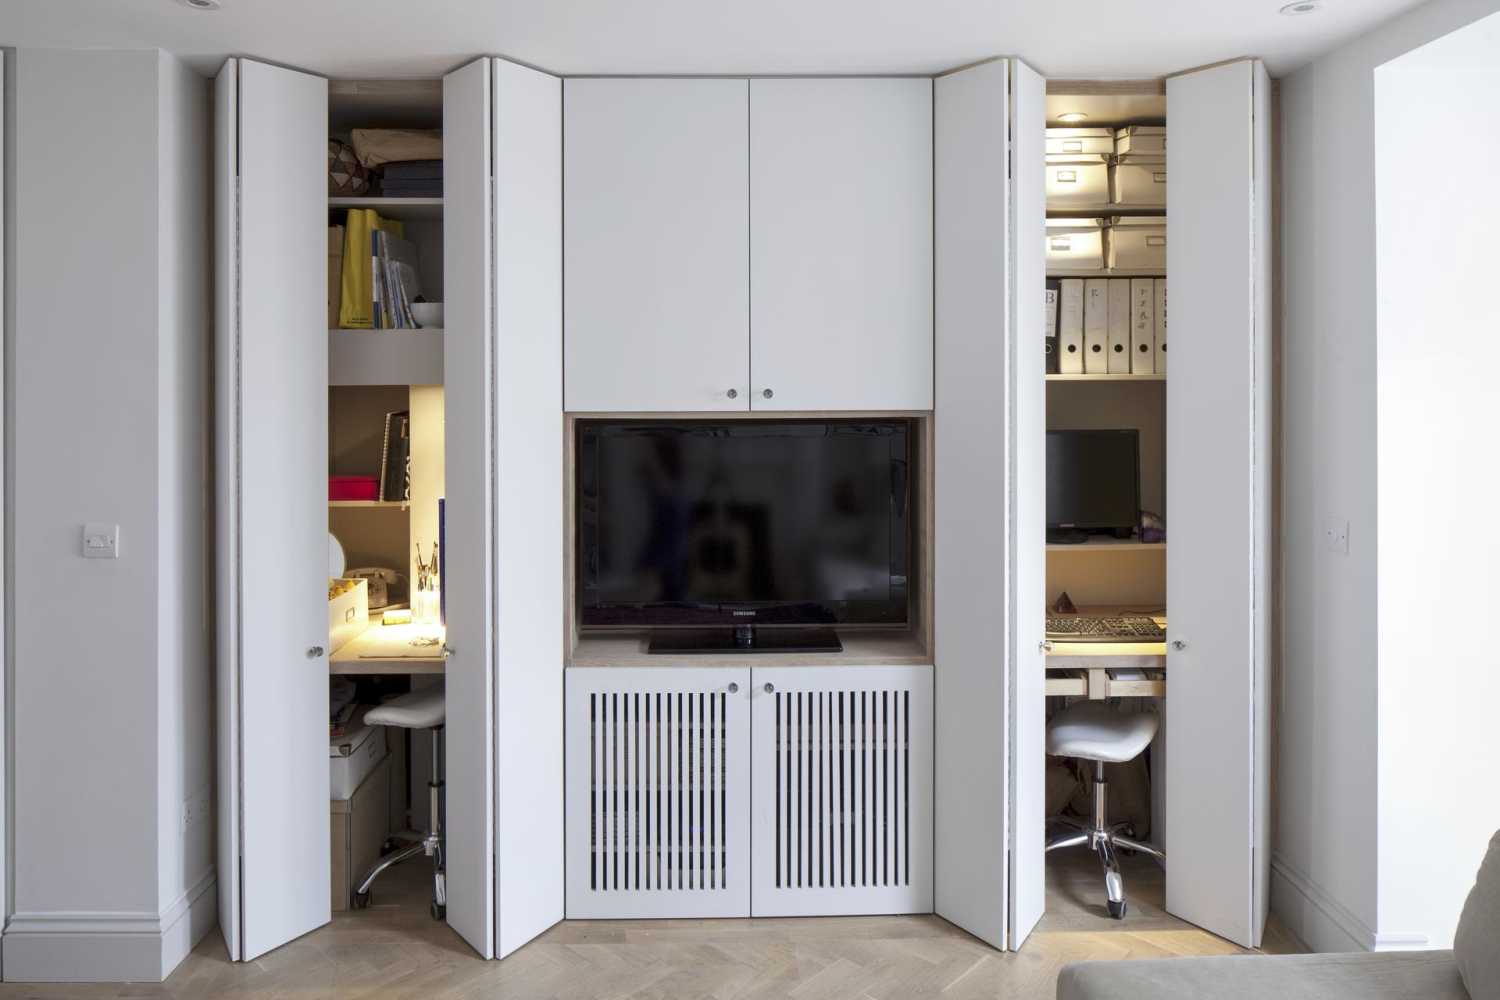 White cupboard doors opening to reveal hidden desks and shelves on either side of a TV